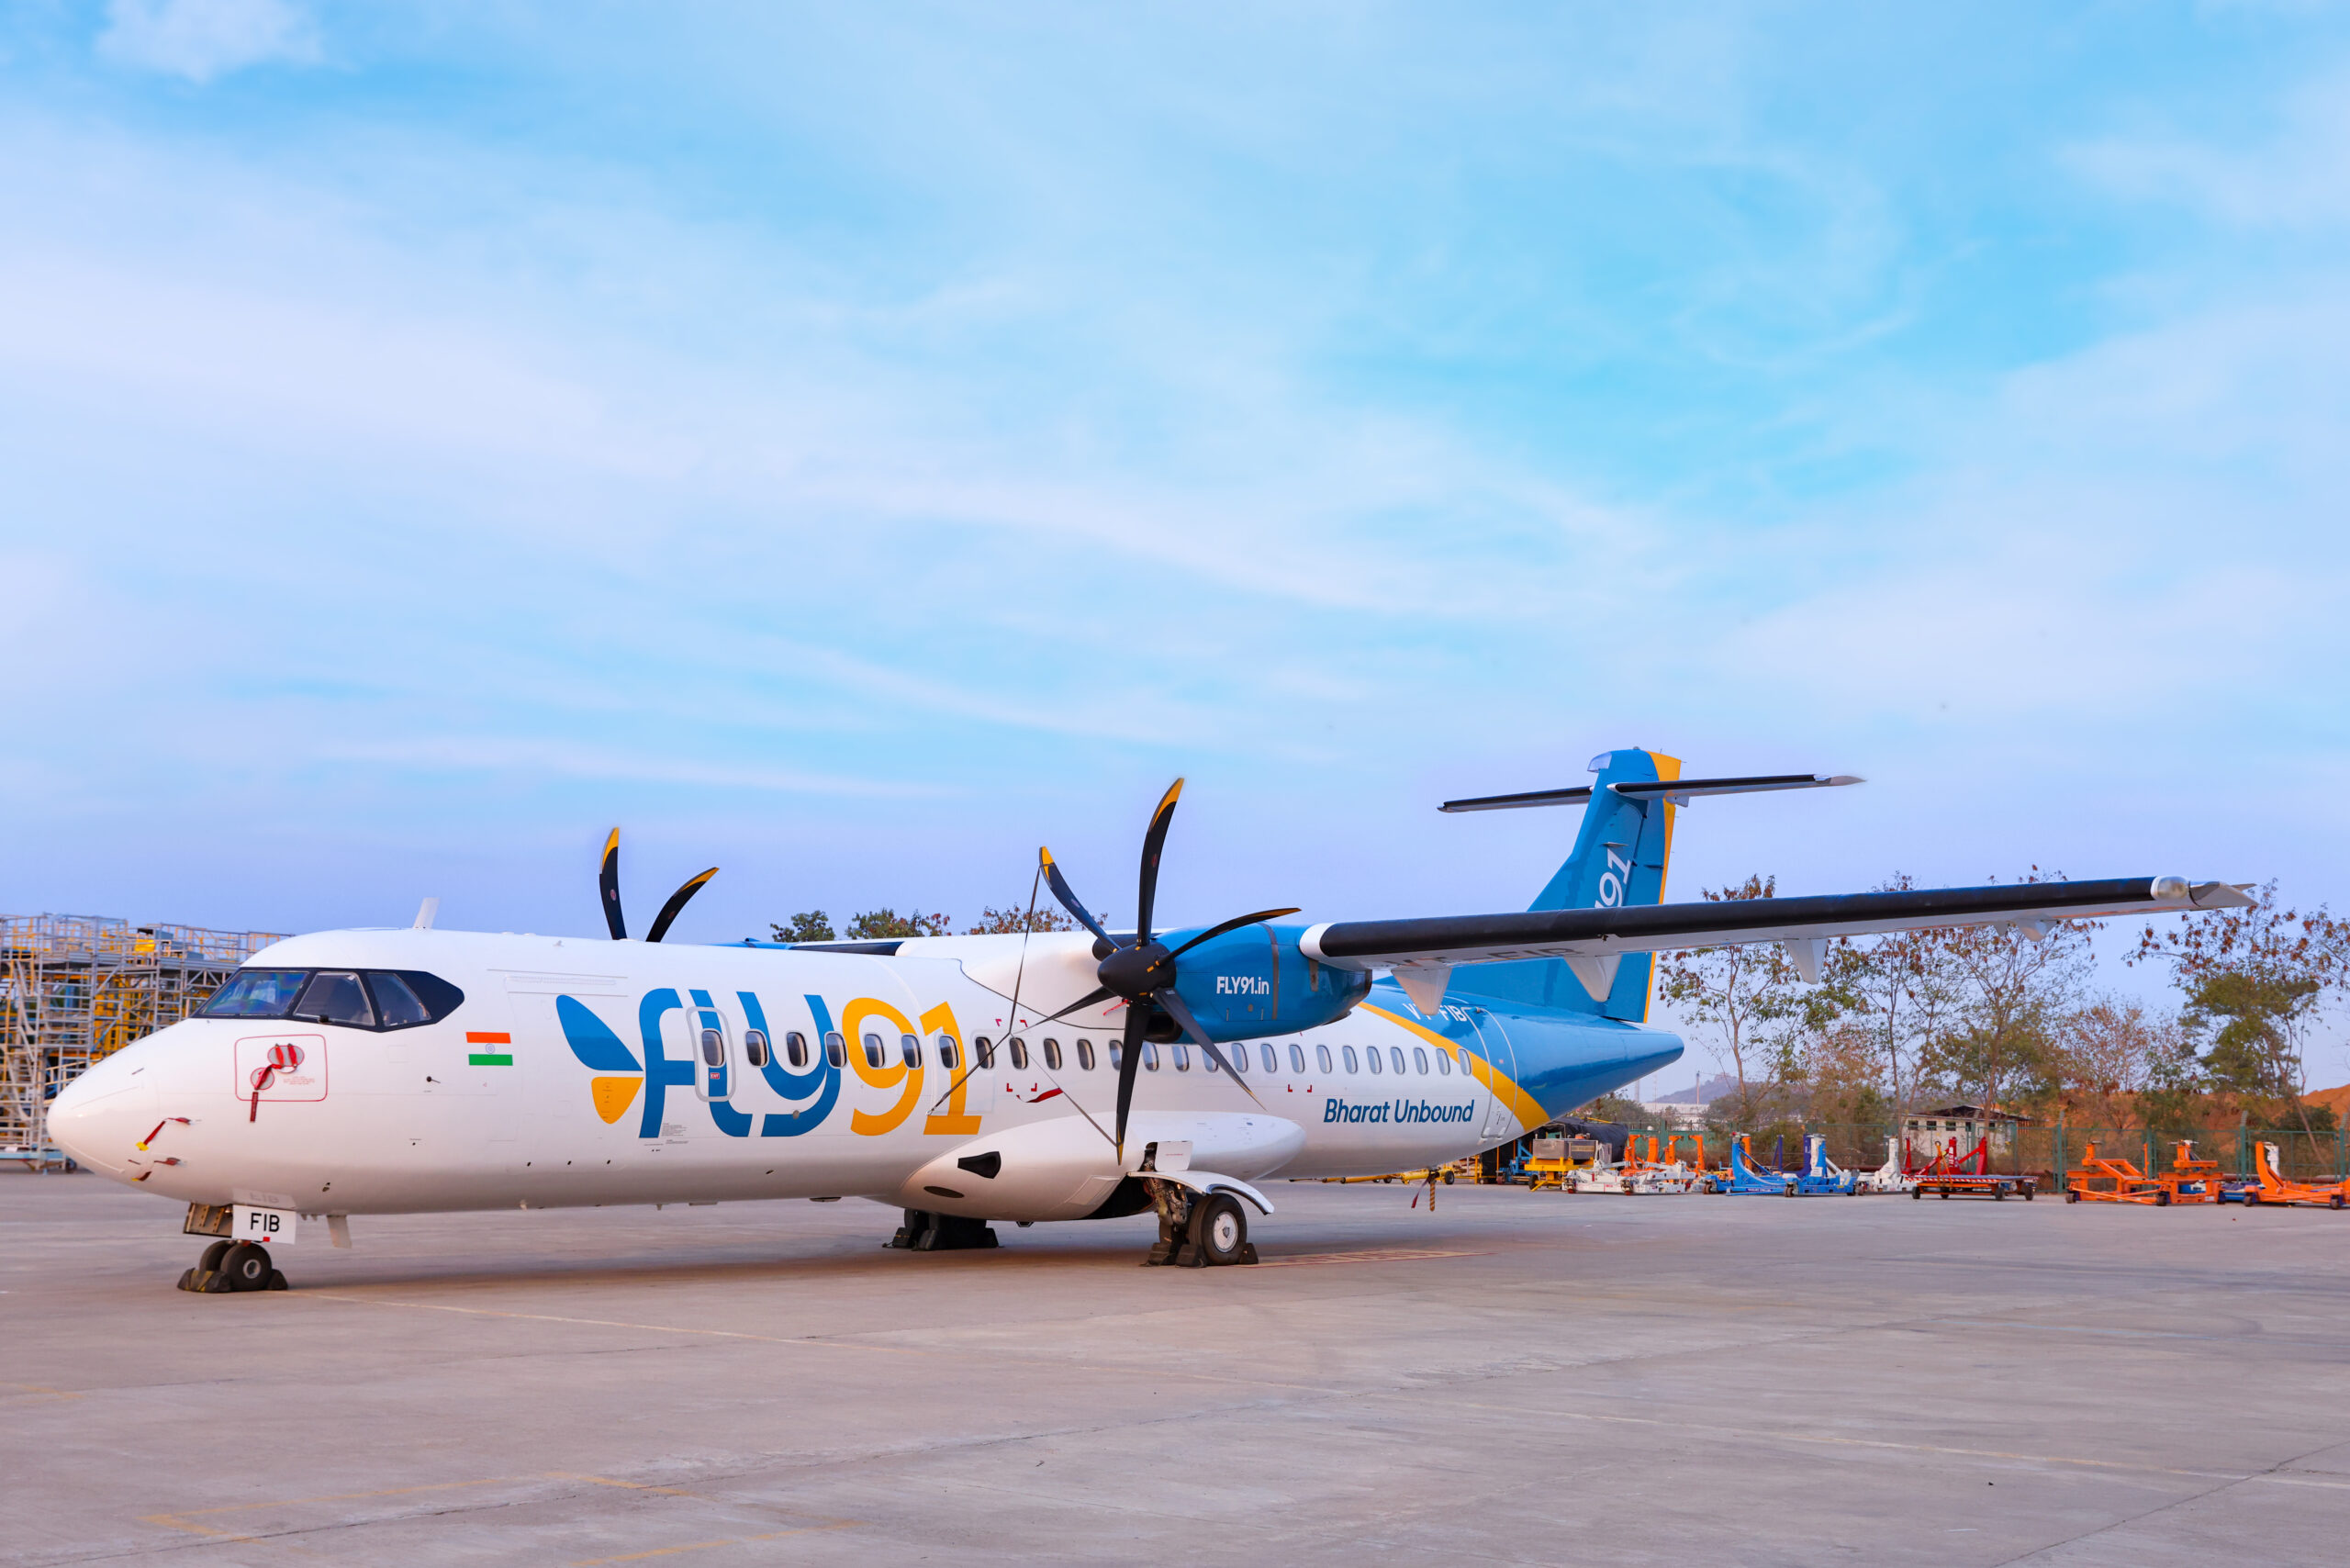 Indian regional airline FLY91 and ATR have inked a global maintenance agreement (GMA) © ATR